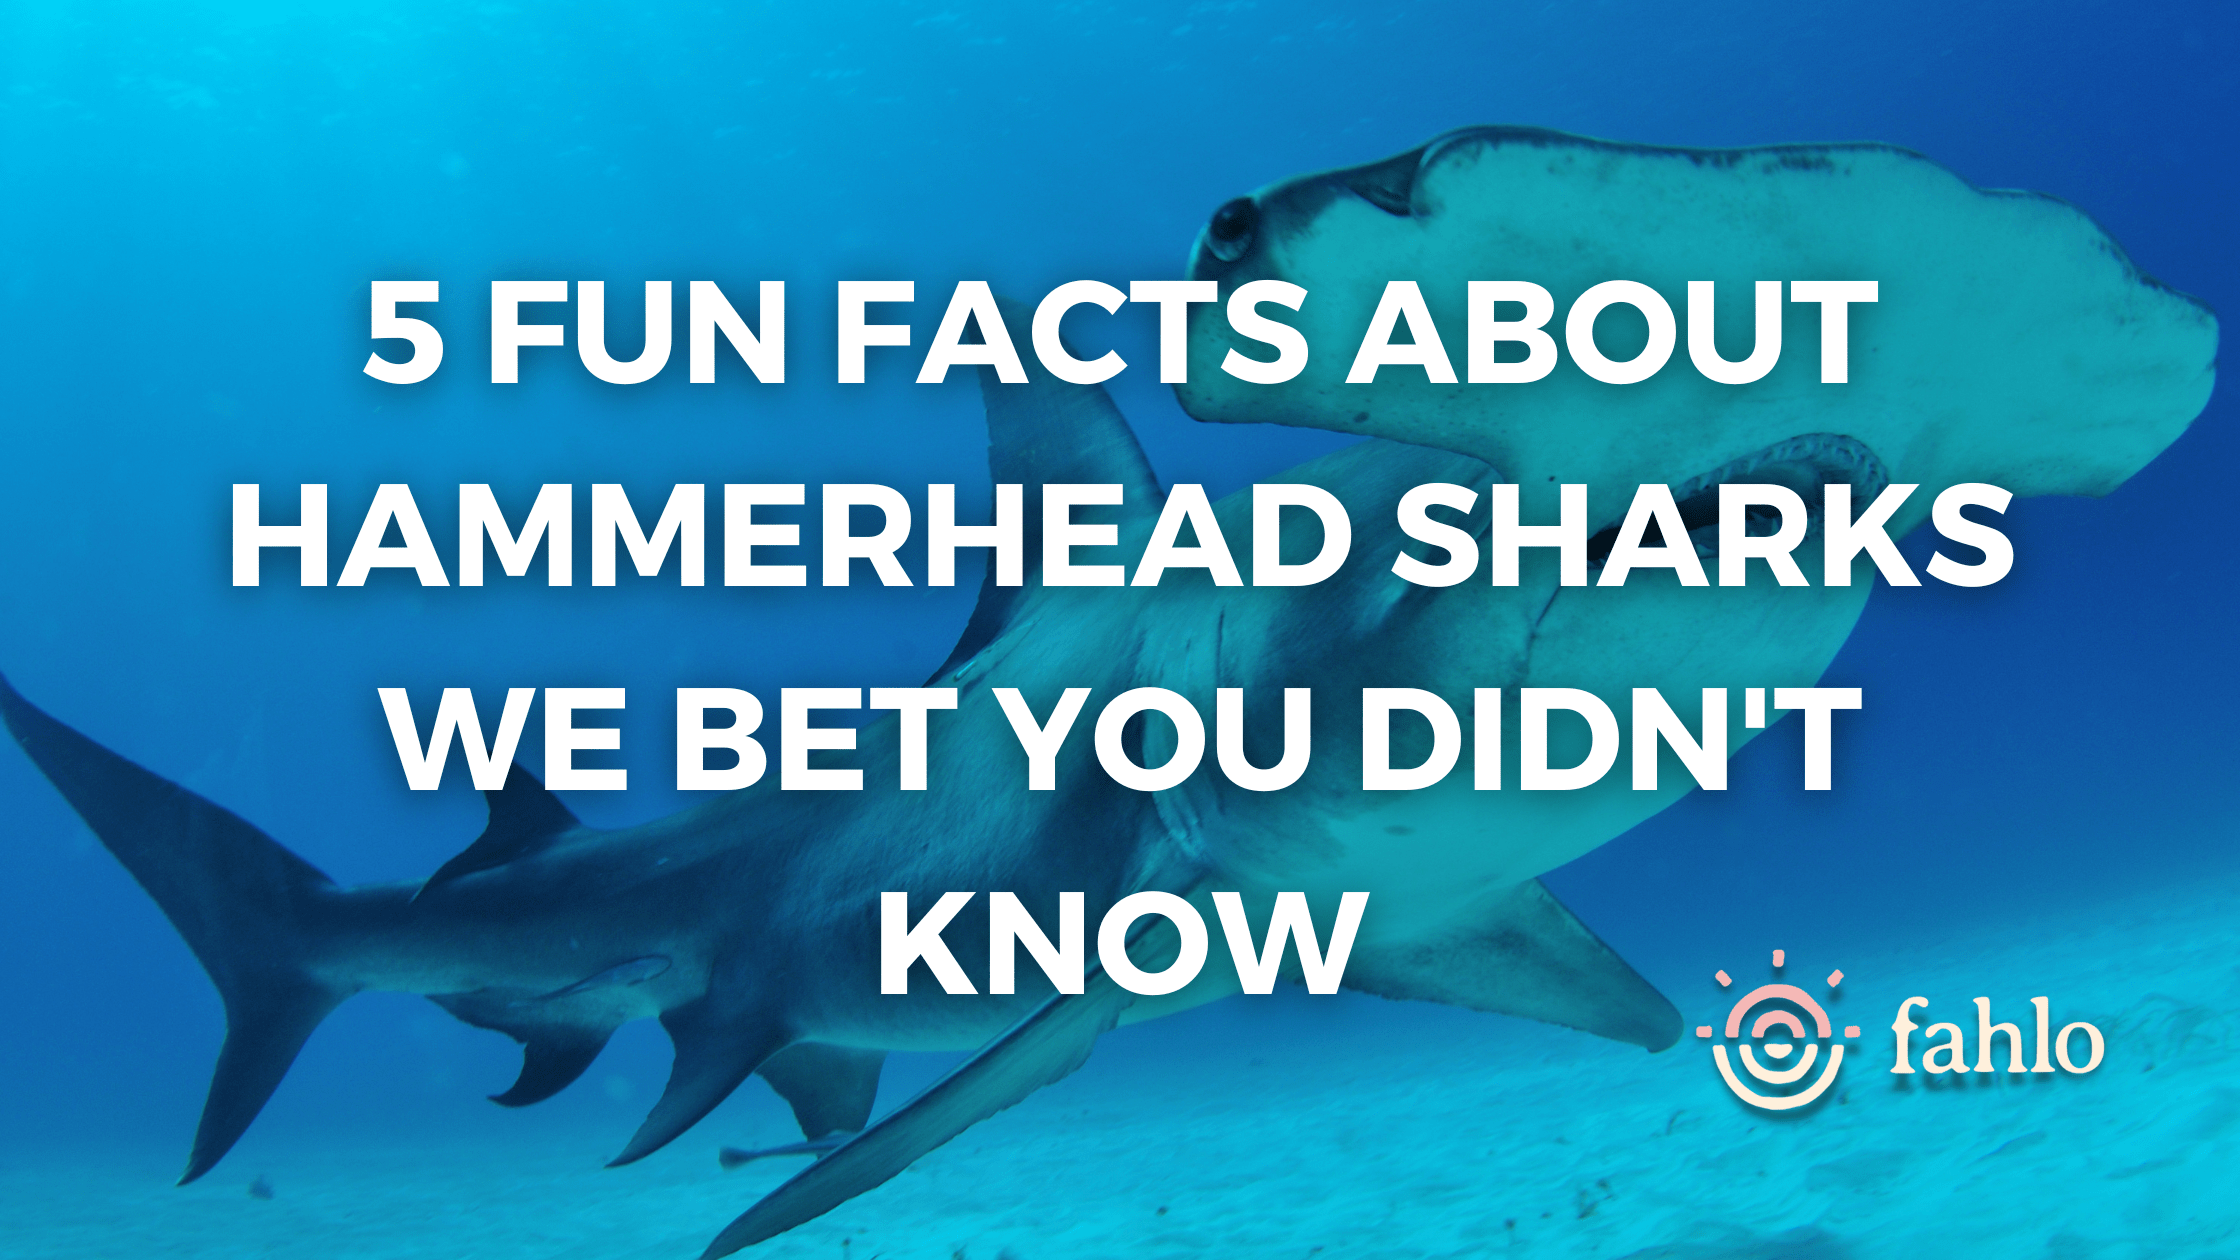 Big Blue Conservation - Here's something I bet you didn't know! A